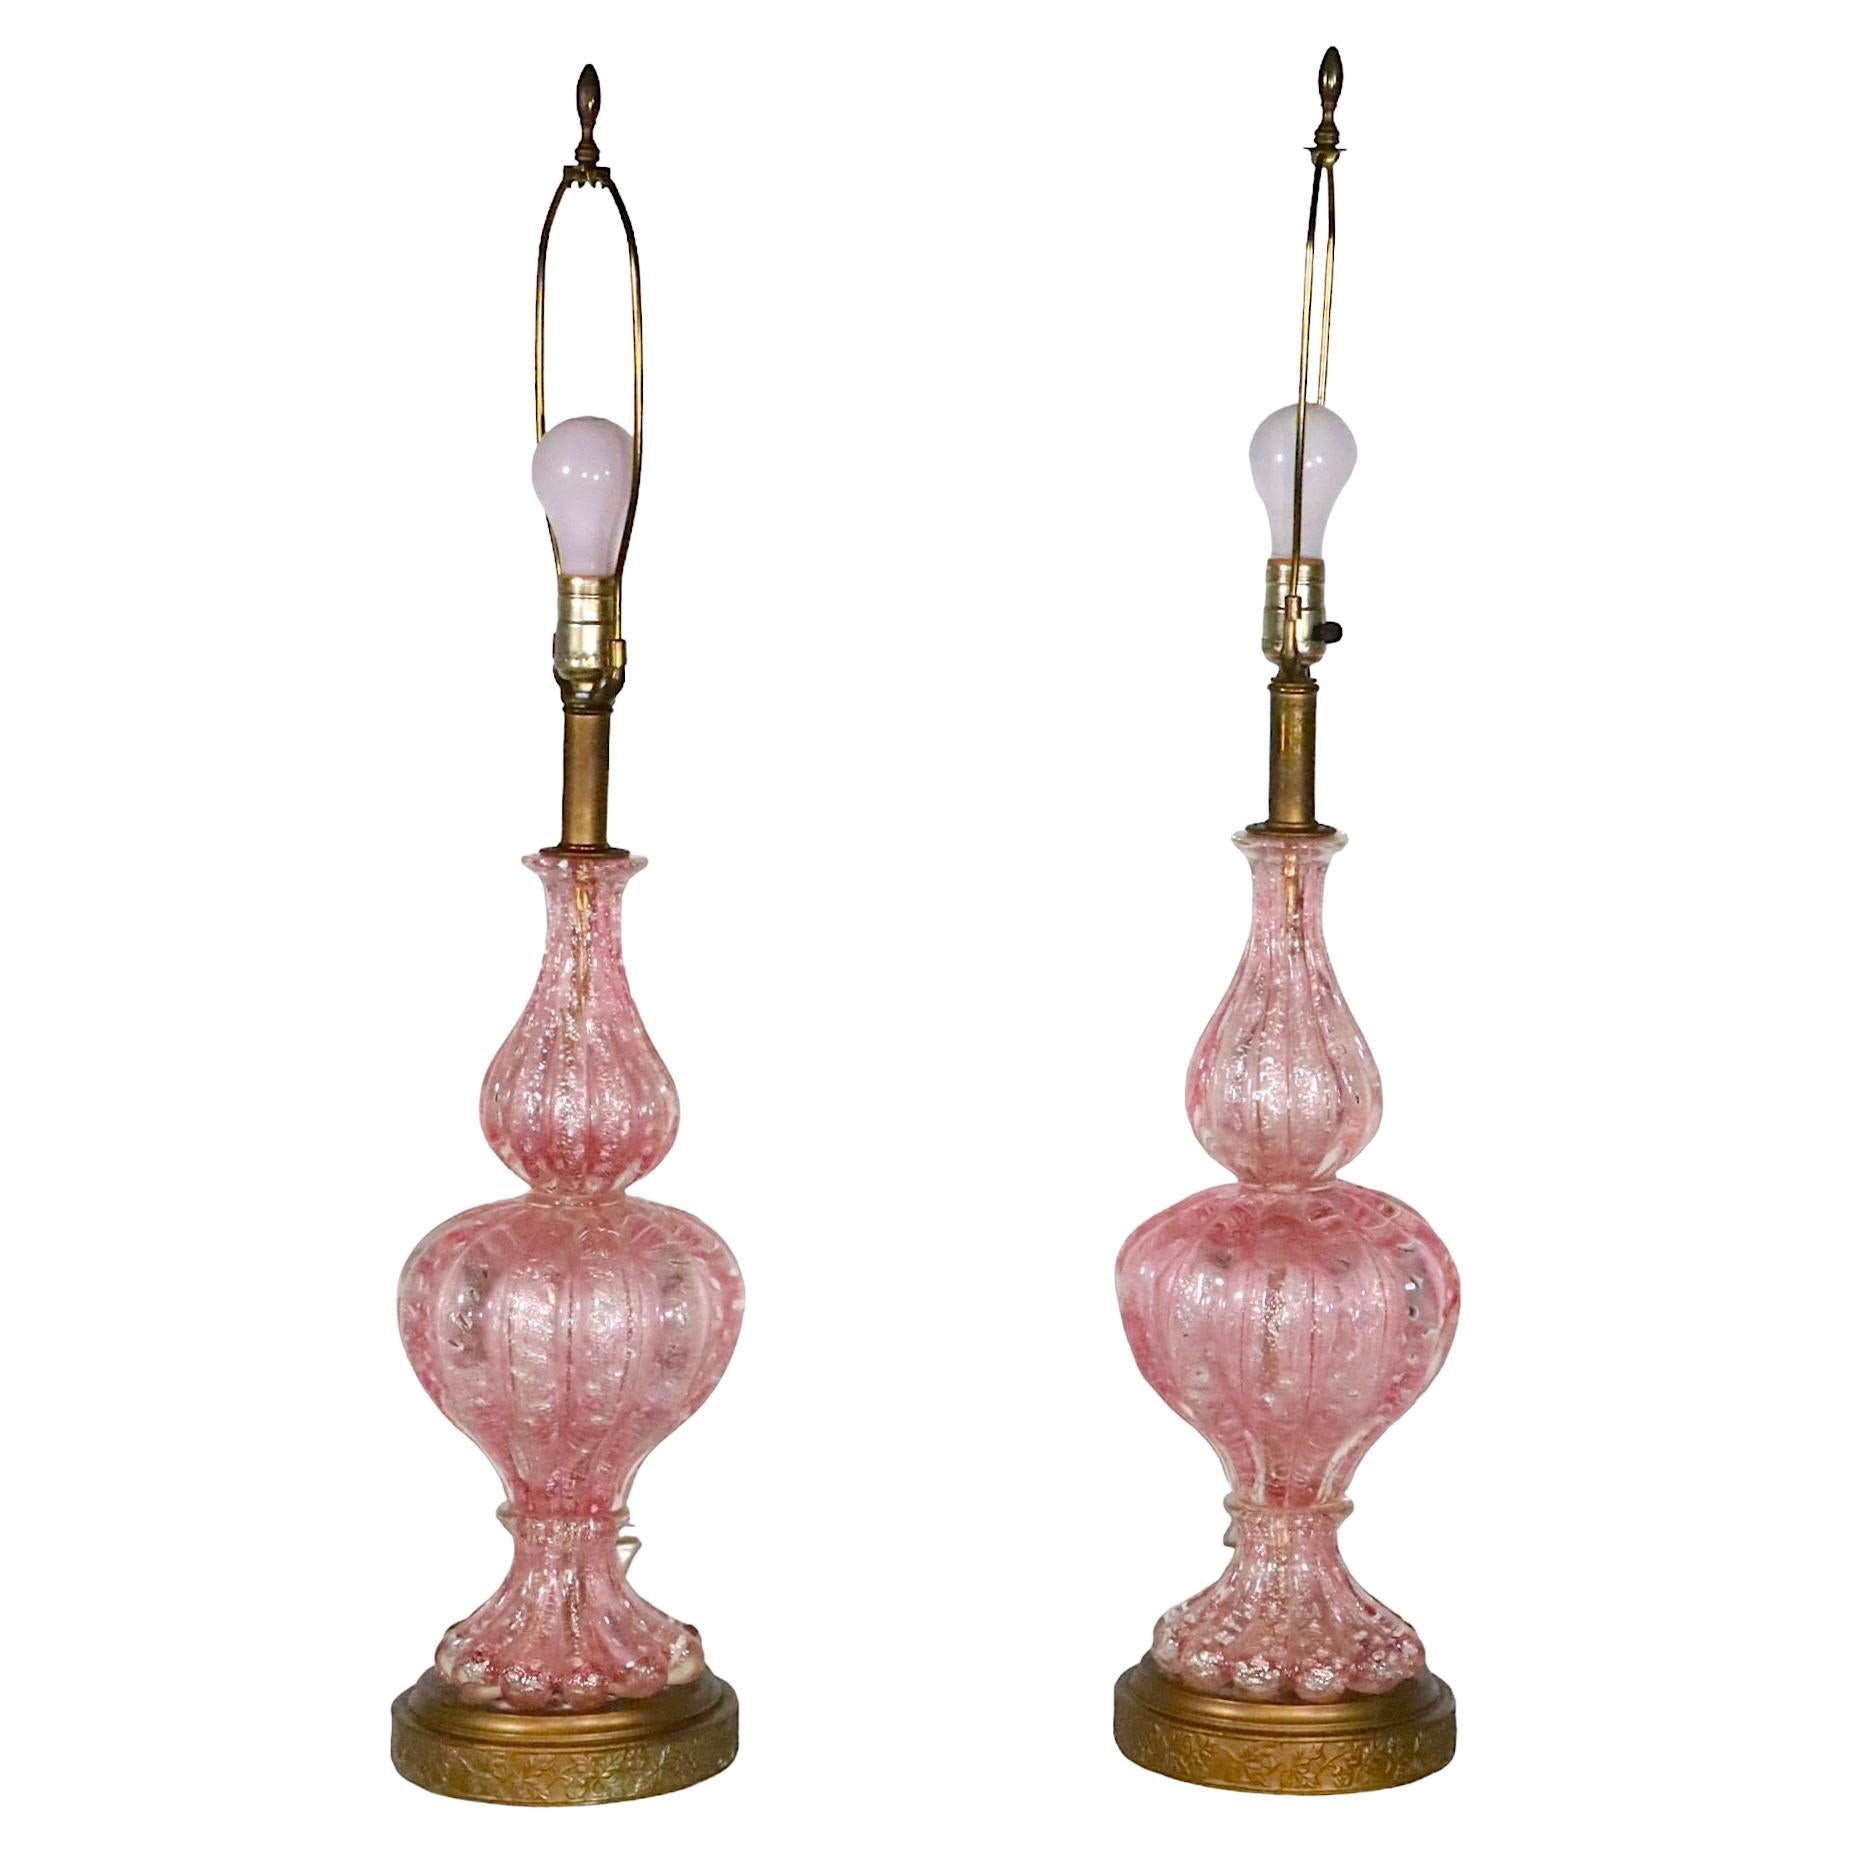 Pr. Murano Art Glass Table Lamps Made in Italy  att.  to  Barovier c. 1950’s  For Sale